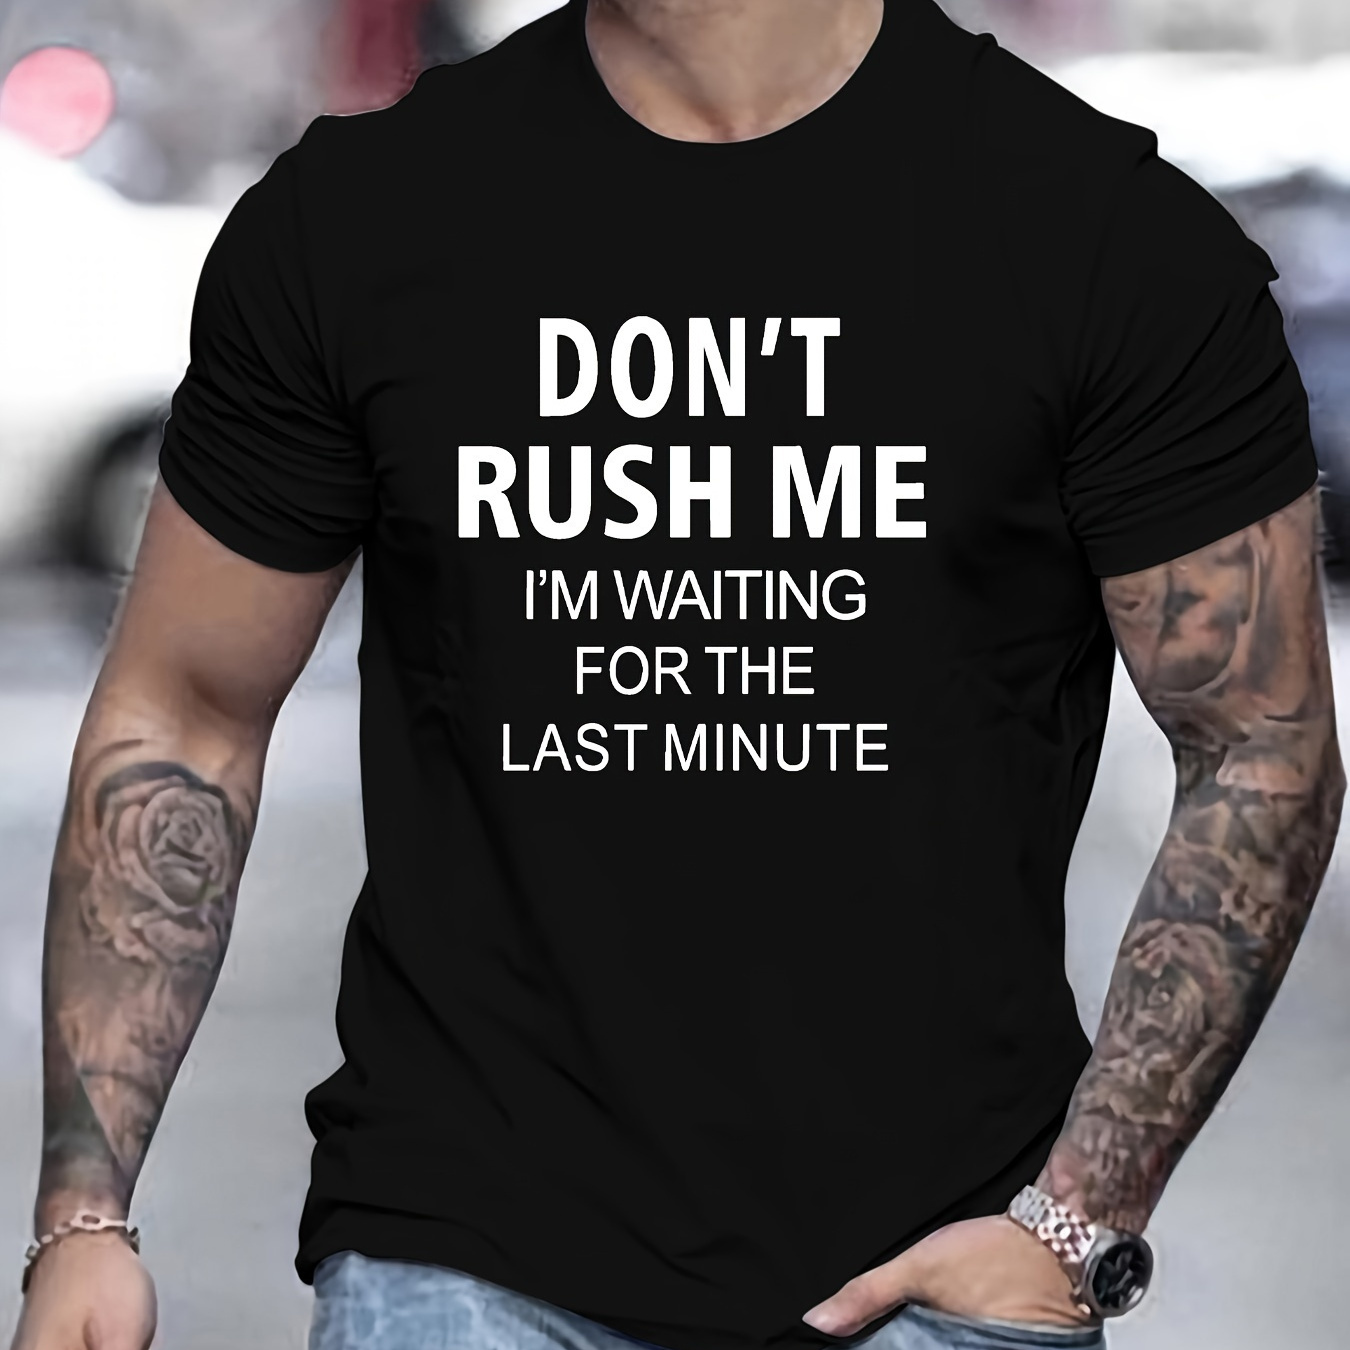 

Don't Rush Me Print T Shirt, Tees For Men, Casual Short Sleeve T-shirt For Summer